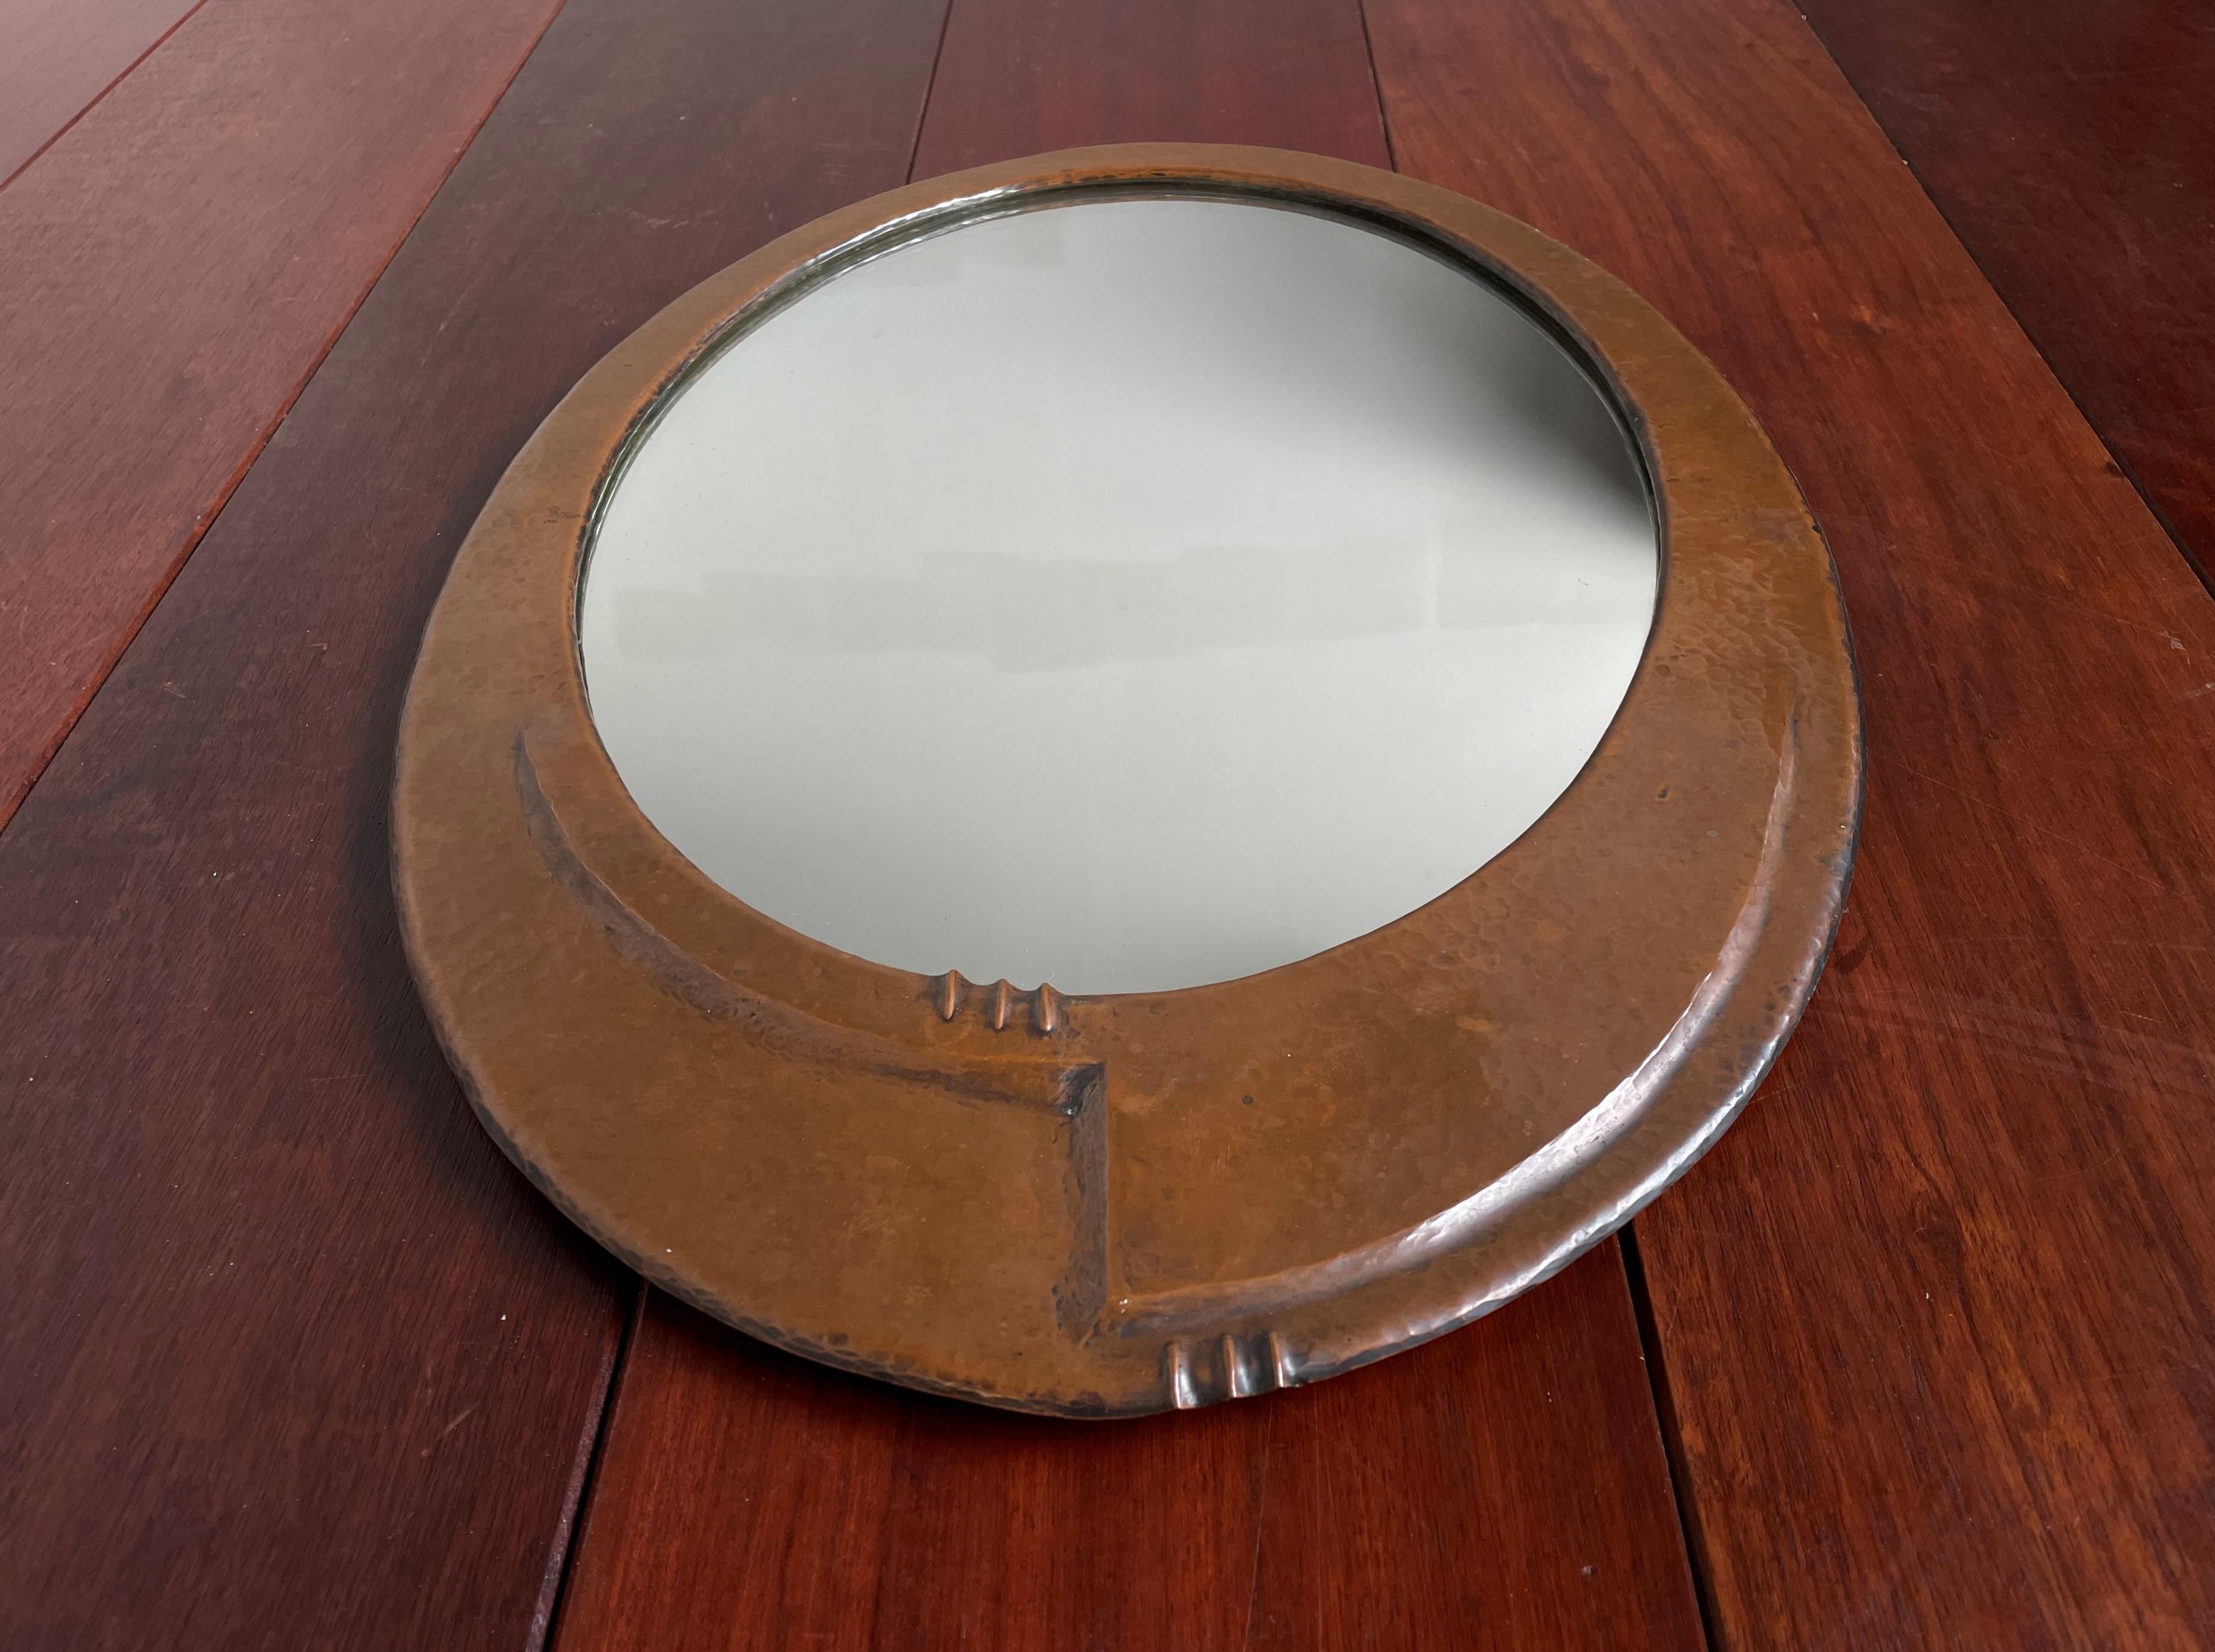 Early 1900s artistic design Arts & Crafts wall mirror.

This all-handcrafted, practical size Arts & Crafts antique with its original mirror is an absolute joy to own and look at. The unusual and attractive asymmetrical design of the embossed